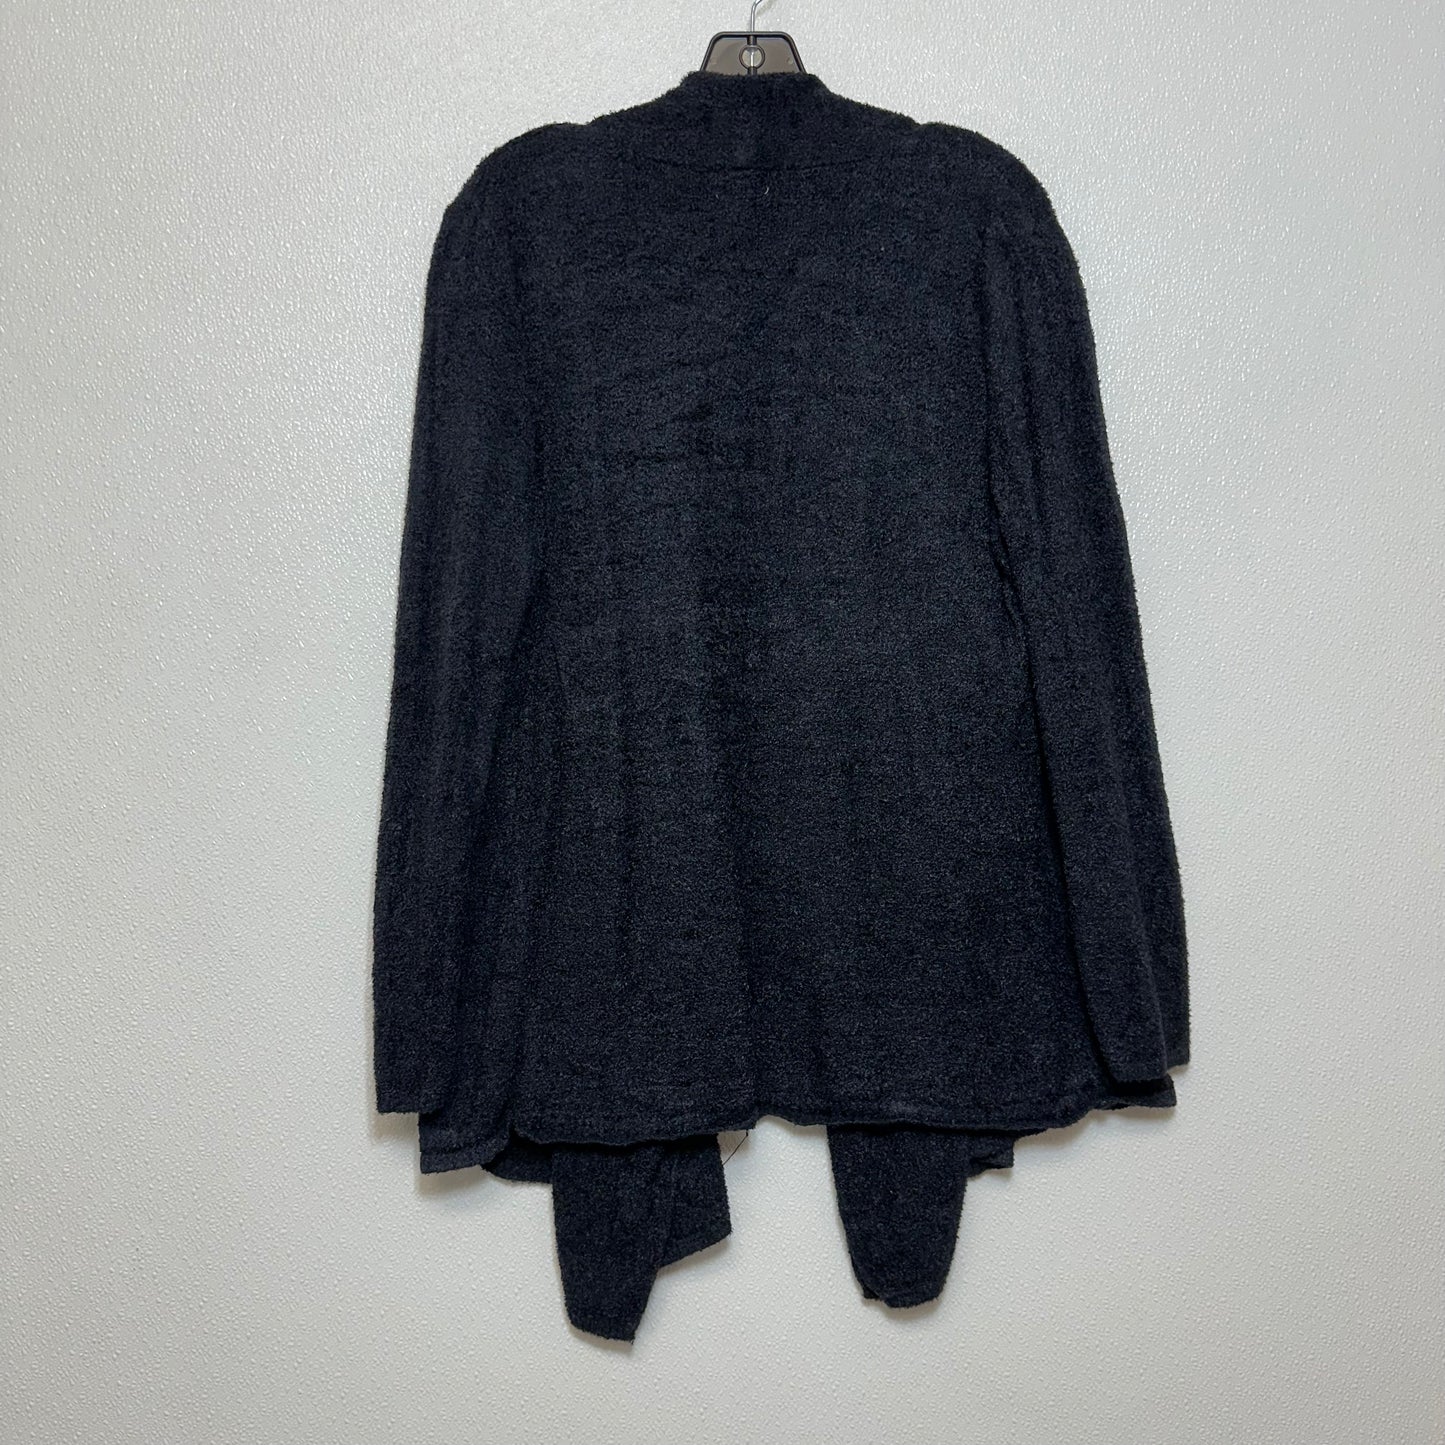 Cardigan By Soma  Size: L